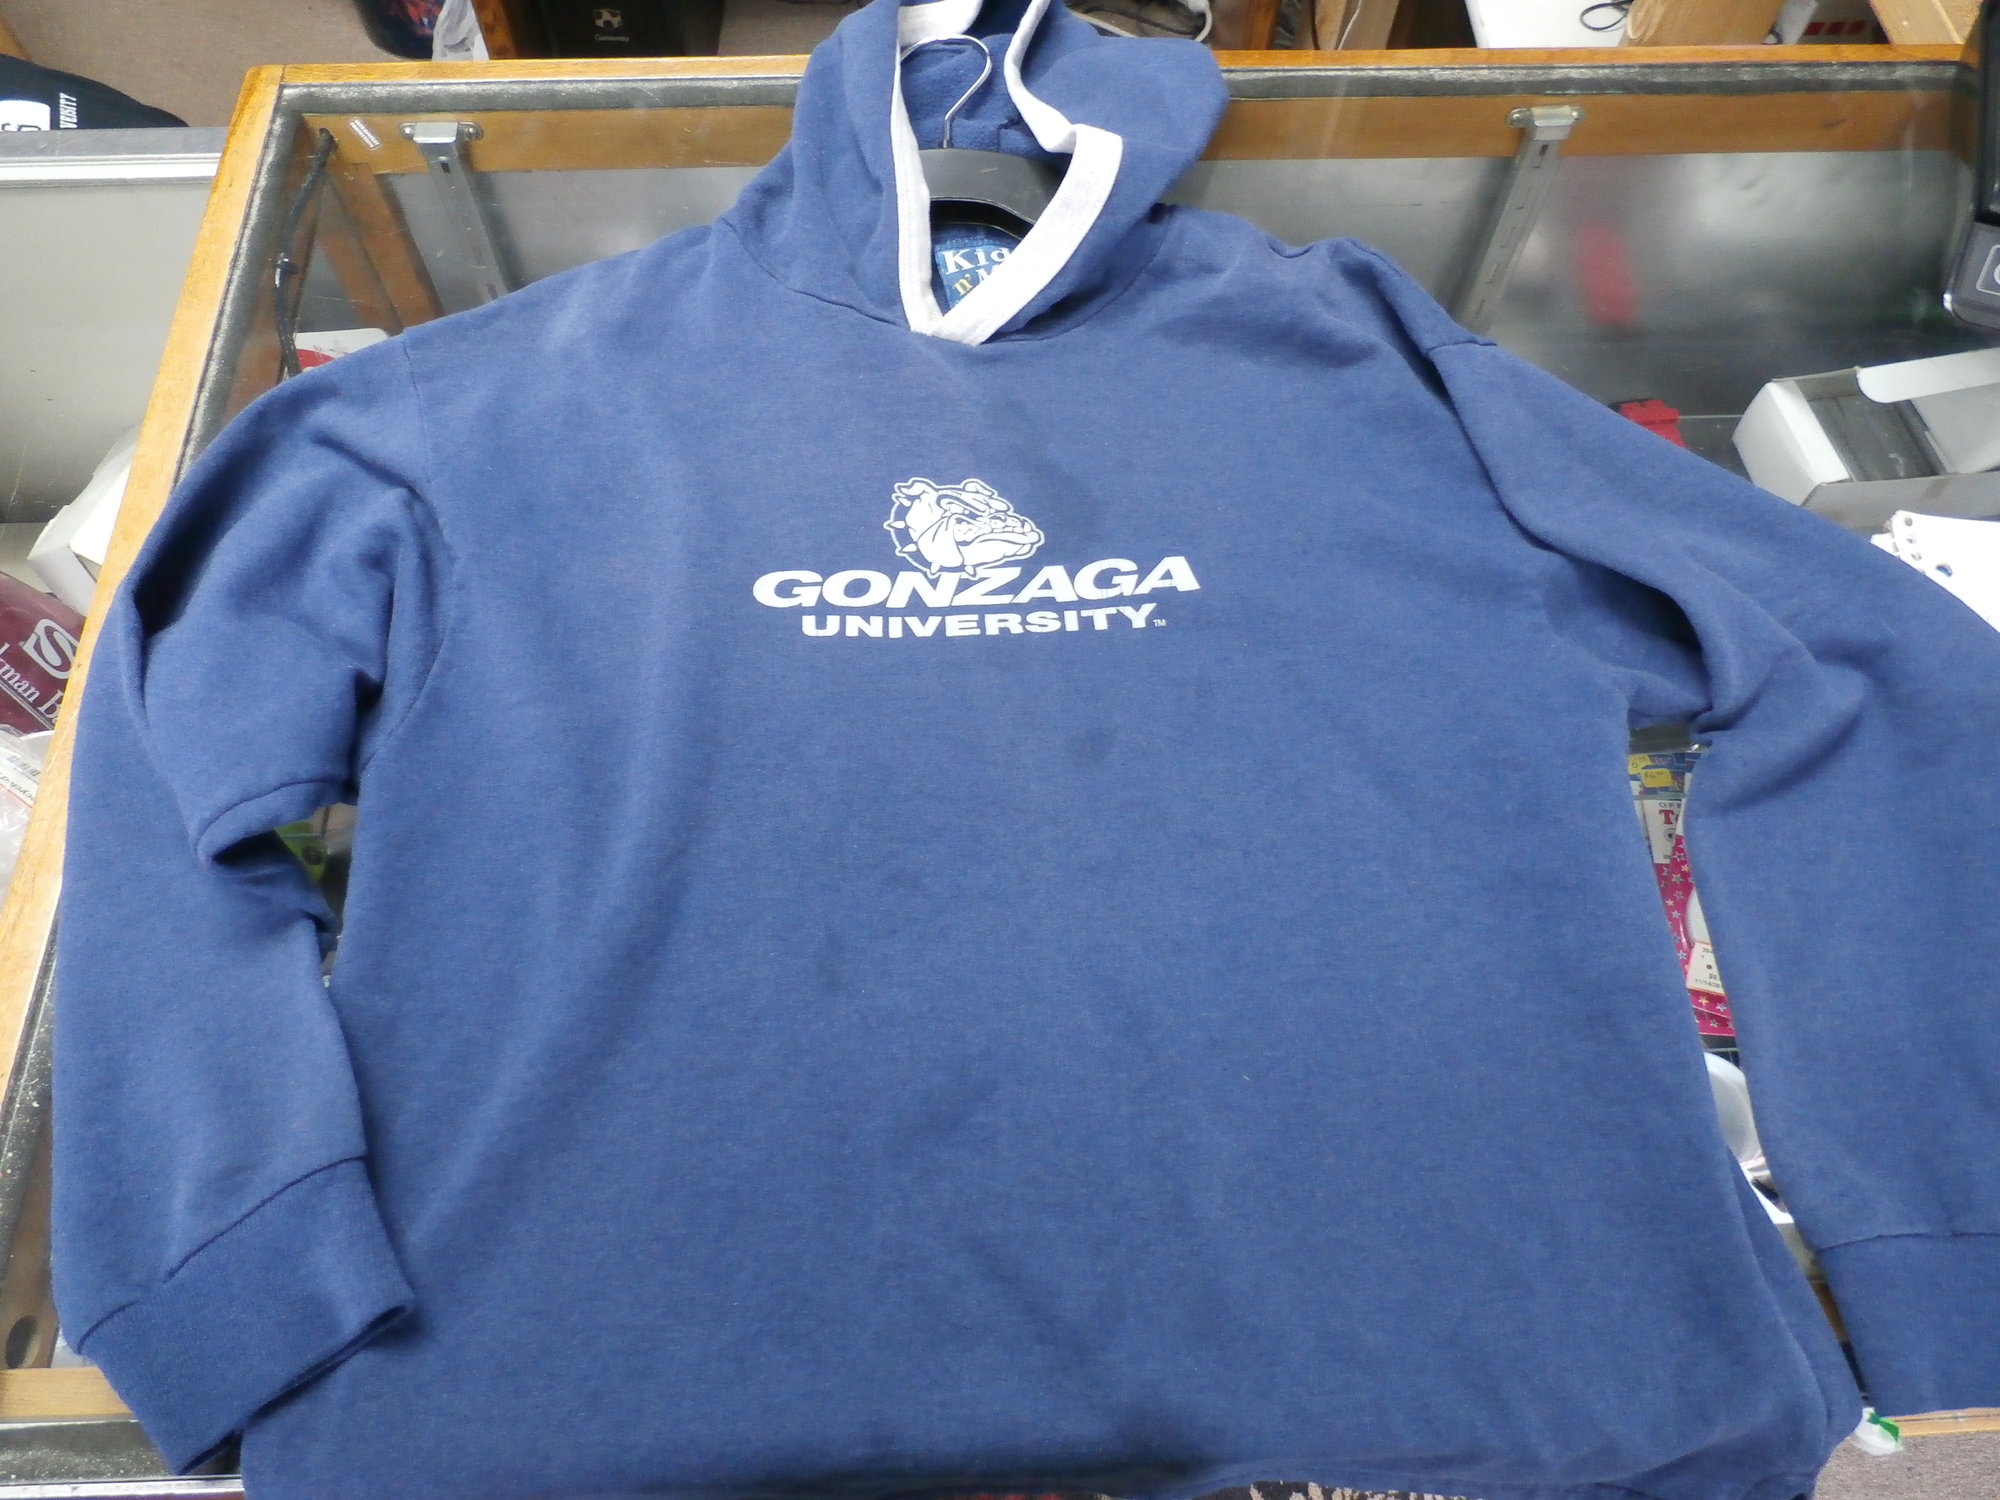 Gonzaga Bulldogs YOUTH hoodie blue size Large 14-16 poly cotton blend #22143
Rating: (see below) 4- Fair Condition
Team: Gonzaga Bulldogs
Player:  team
Brand: Kid N' Me
Size : Youth- Large 14-16 ( Measures Chest 18\" ; Length 21.5\") armpit to armpit; shoulder to hem
Color: blue
Style: long sleeve; screen printed
Material: 150% cotton 50% polyester
Condition: 4- Fair Condition; wrinkled; some pilling and fuzz; material is stretched and worn from wearing and washing; some fading and discoloration; large 3-inch stain next to logo; several smaller stains on front; logo is cracked (see photos)
Item #: 22143
Shipping: FREE